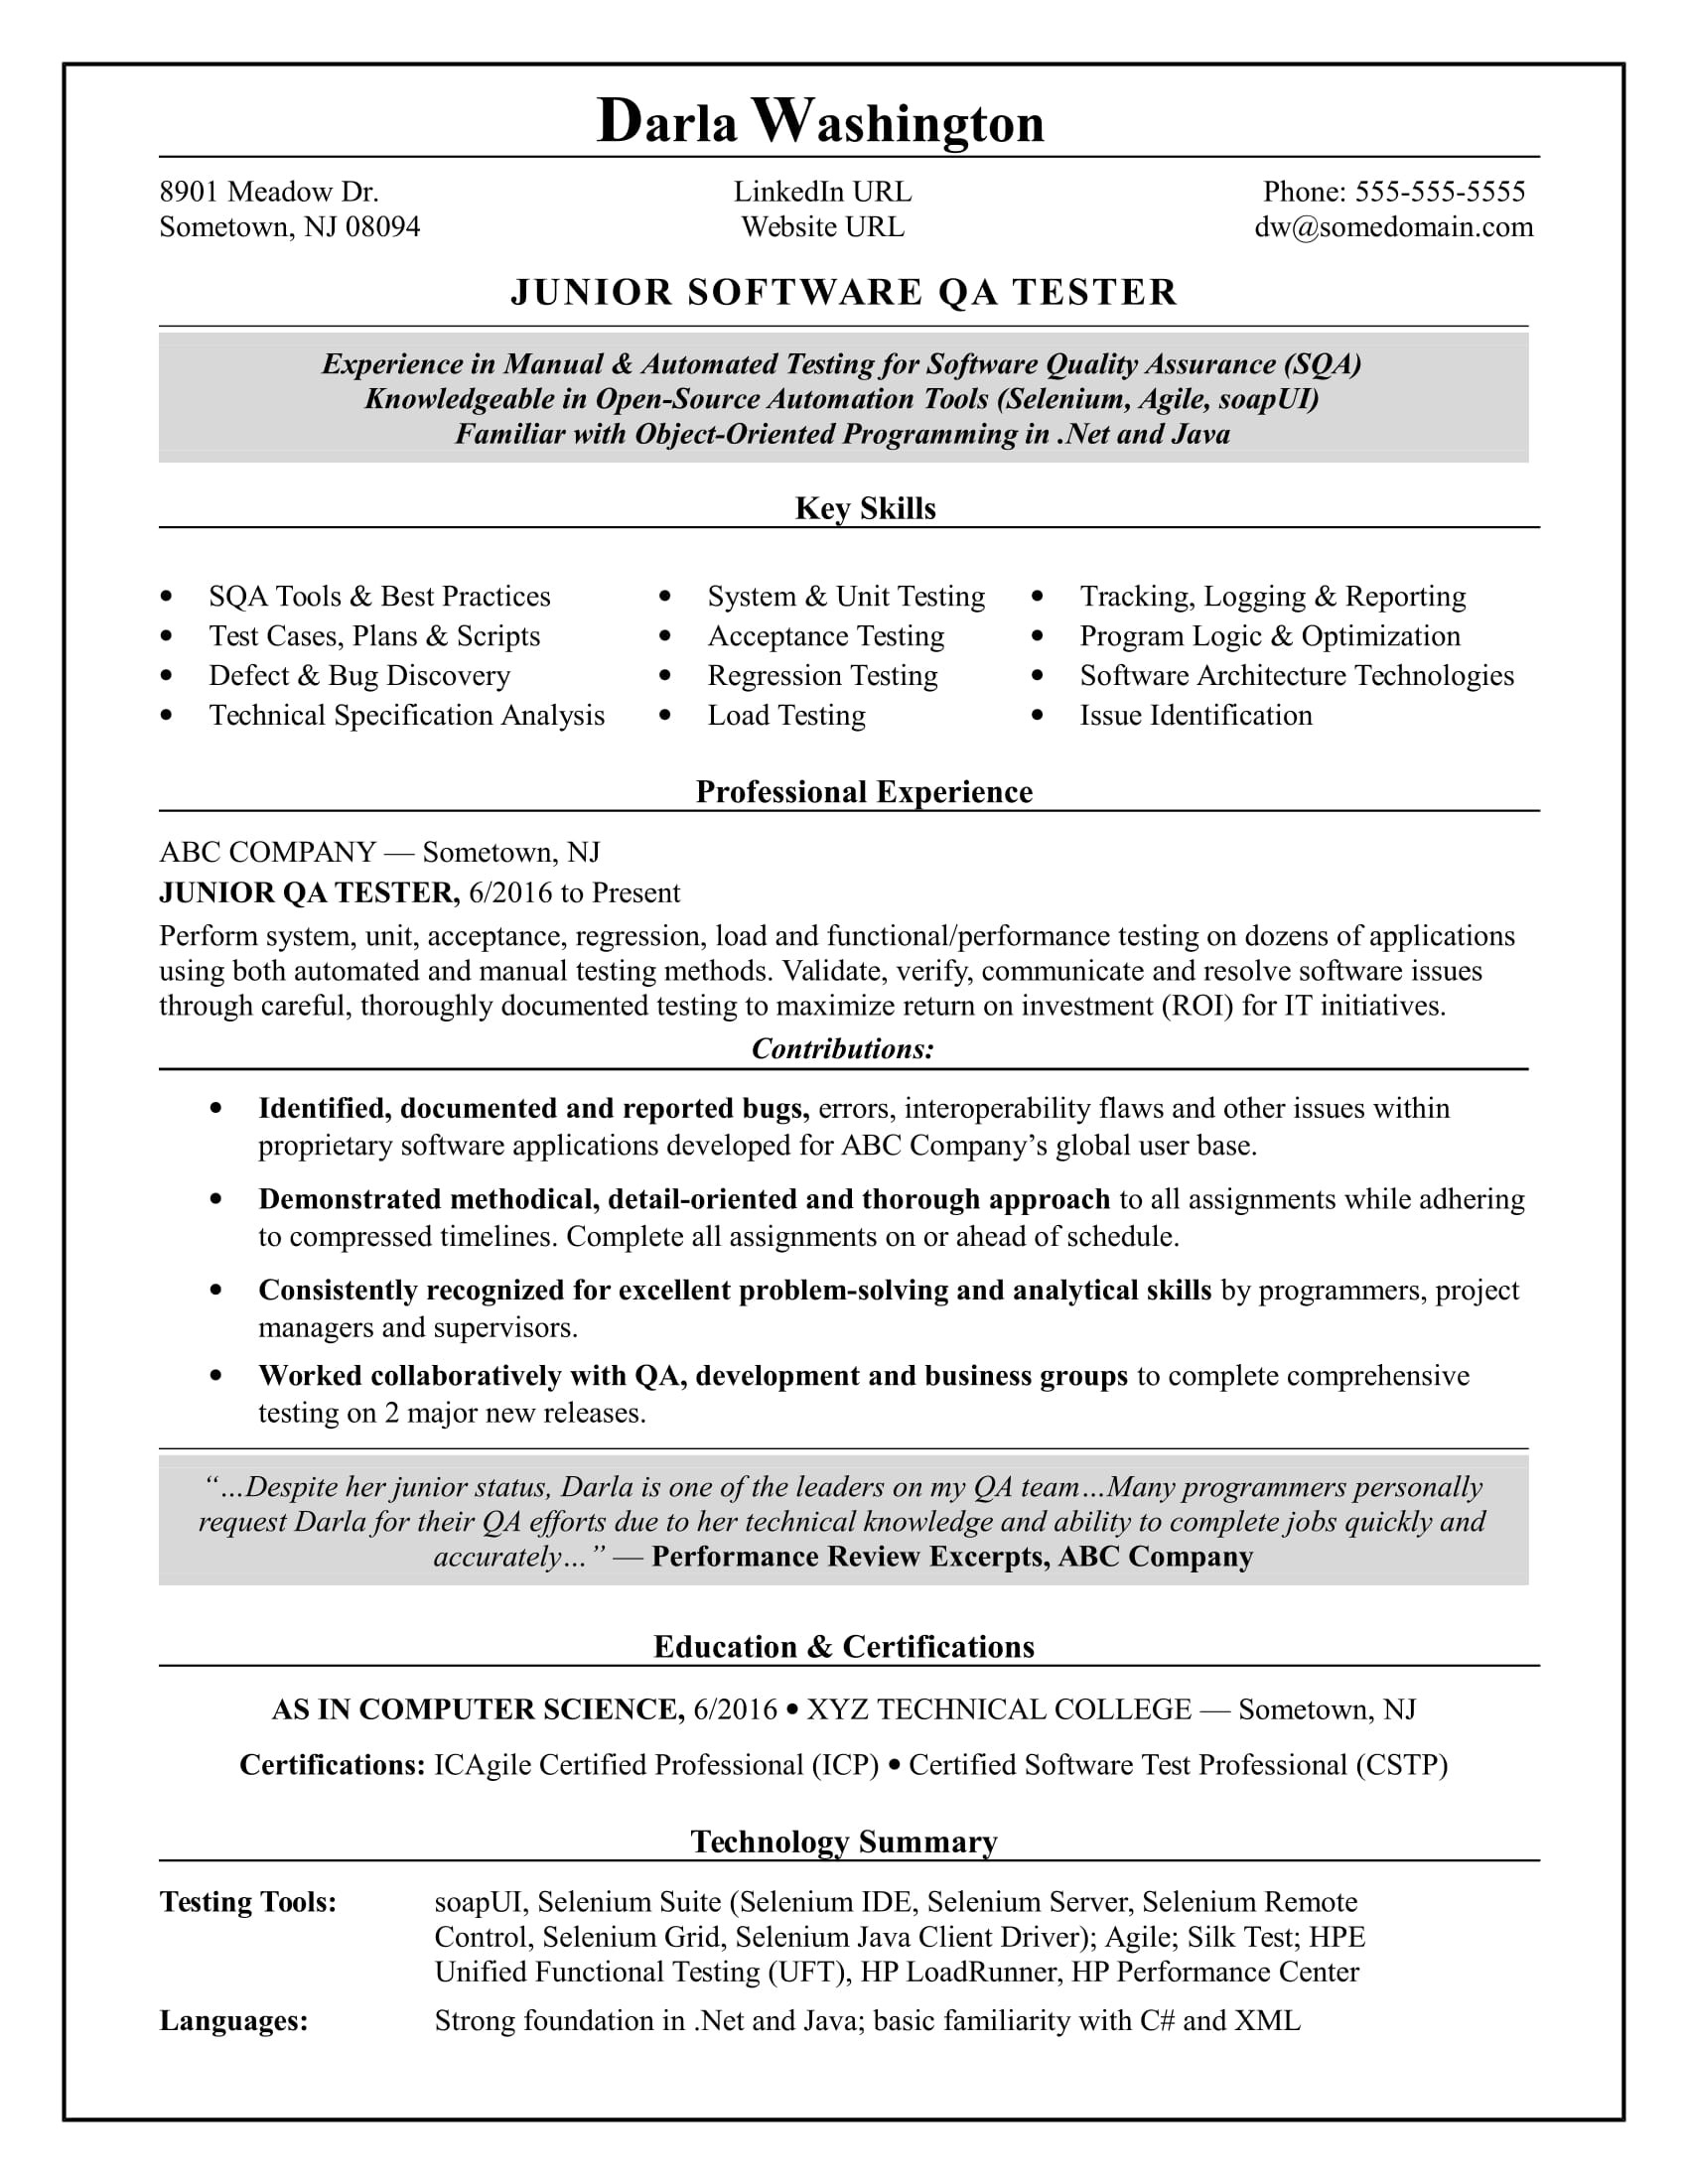 Software Testing Sample Resume with Latest tools Entry-level software Tester Resume Monster.com